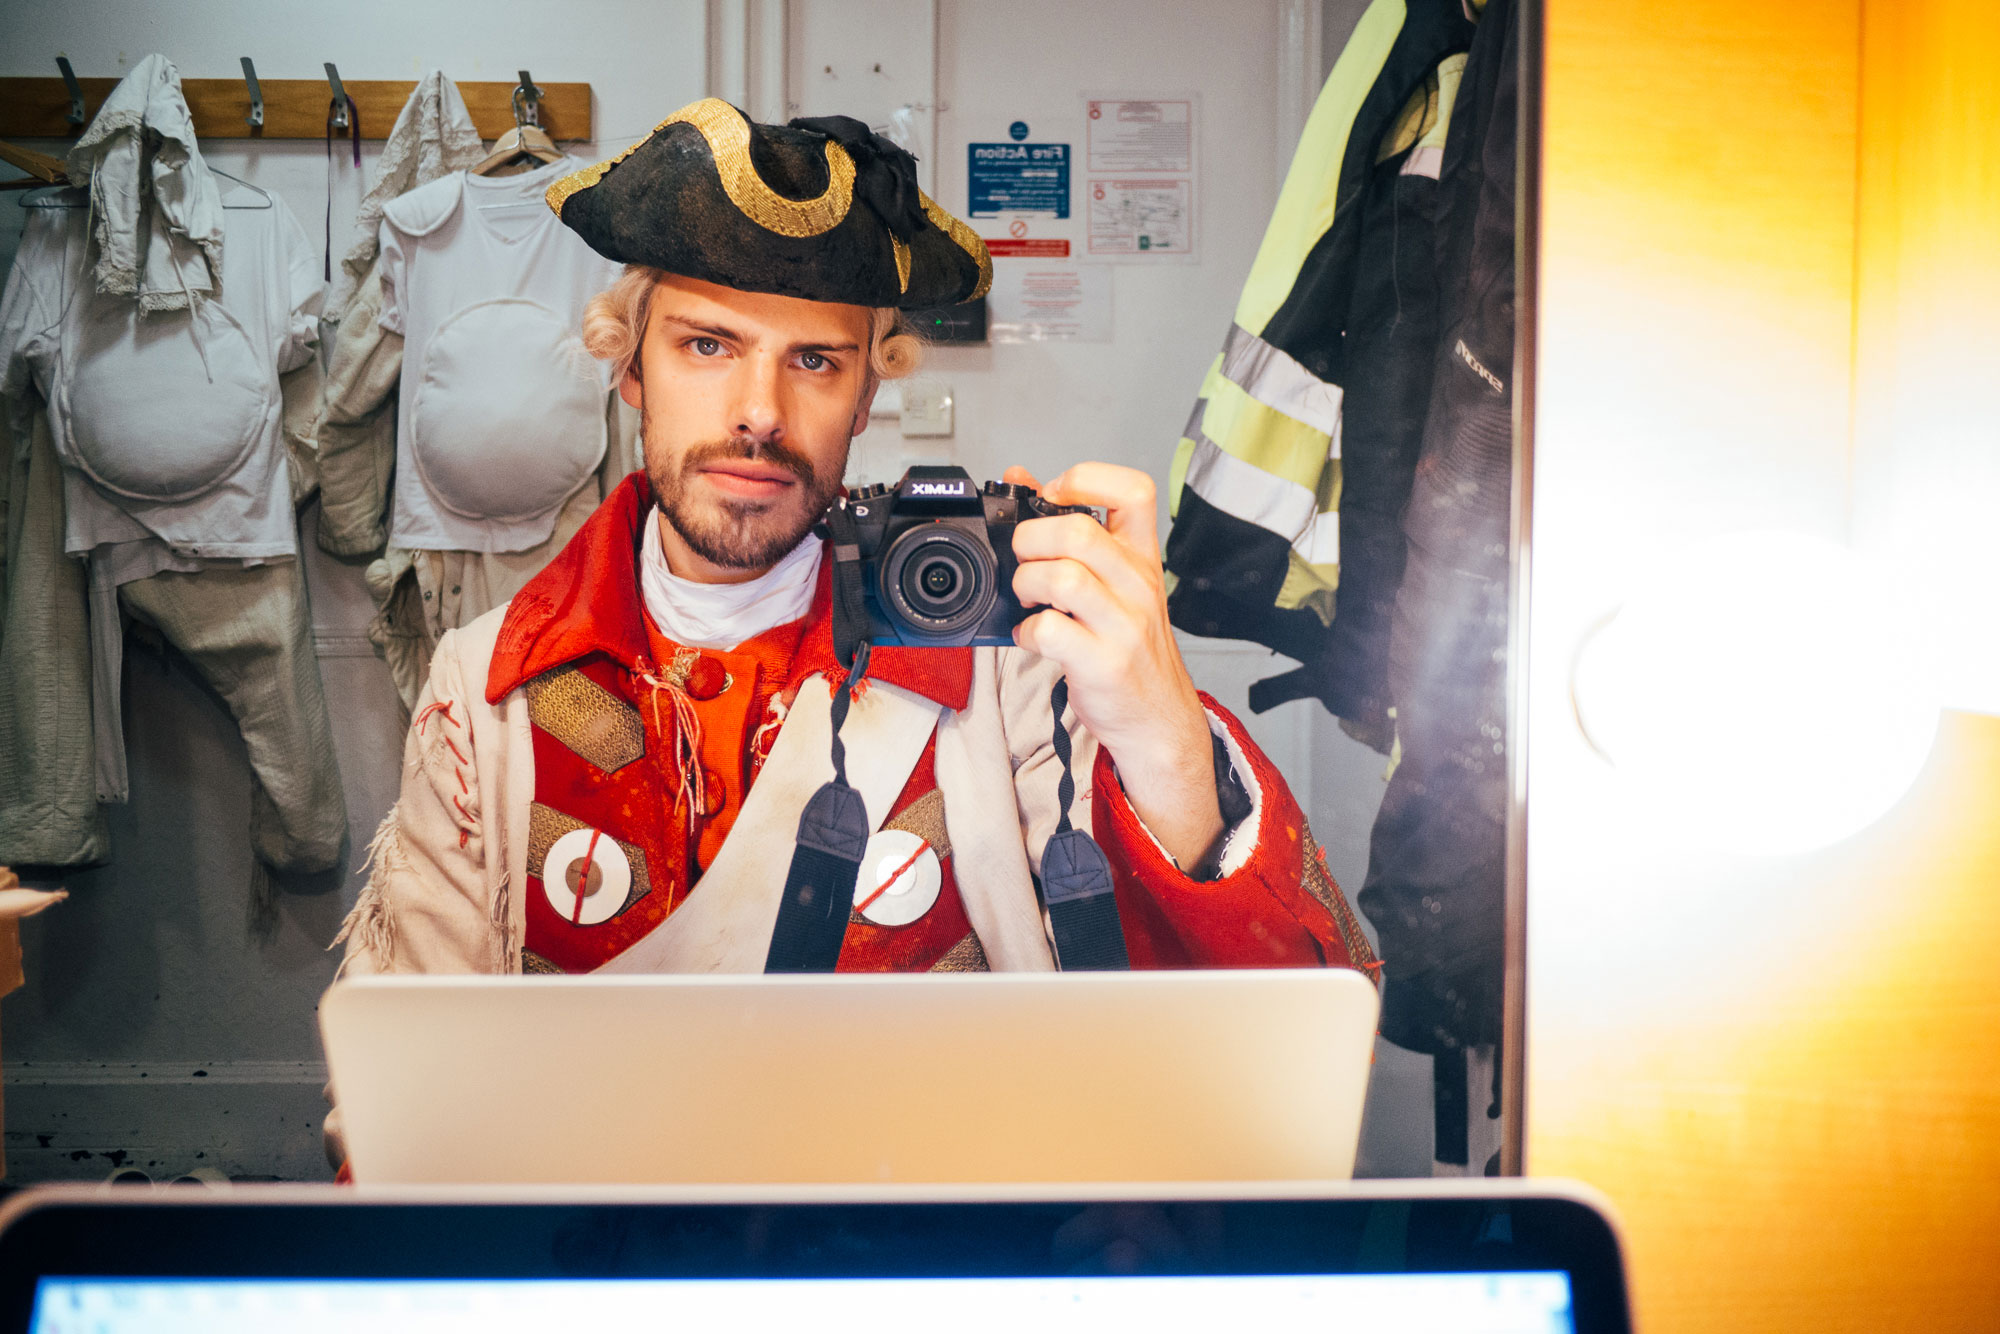 man taking a picture in the mirror: wearing a pirate costume